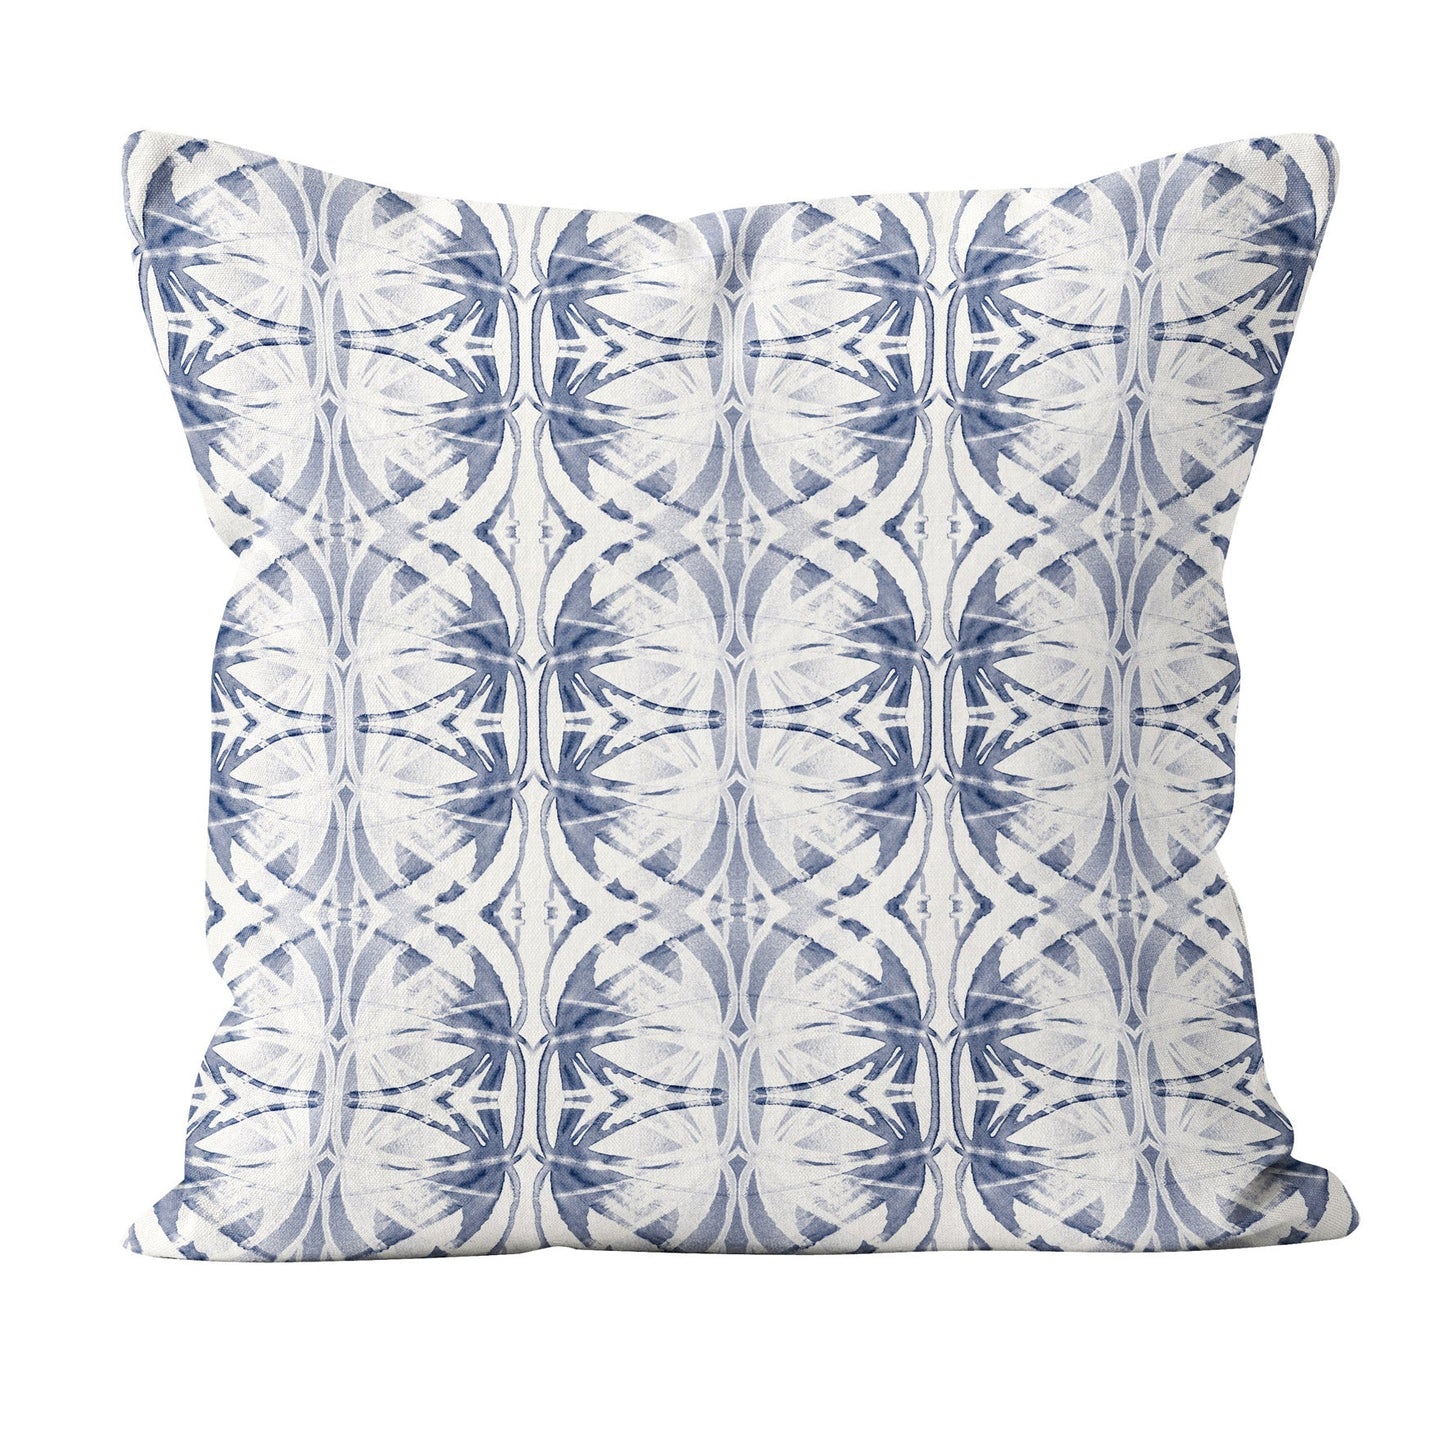 Throw pillow featuring abstract hand painted pattern in blue and white.